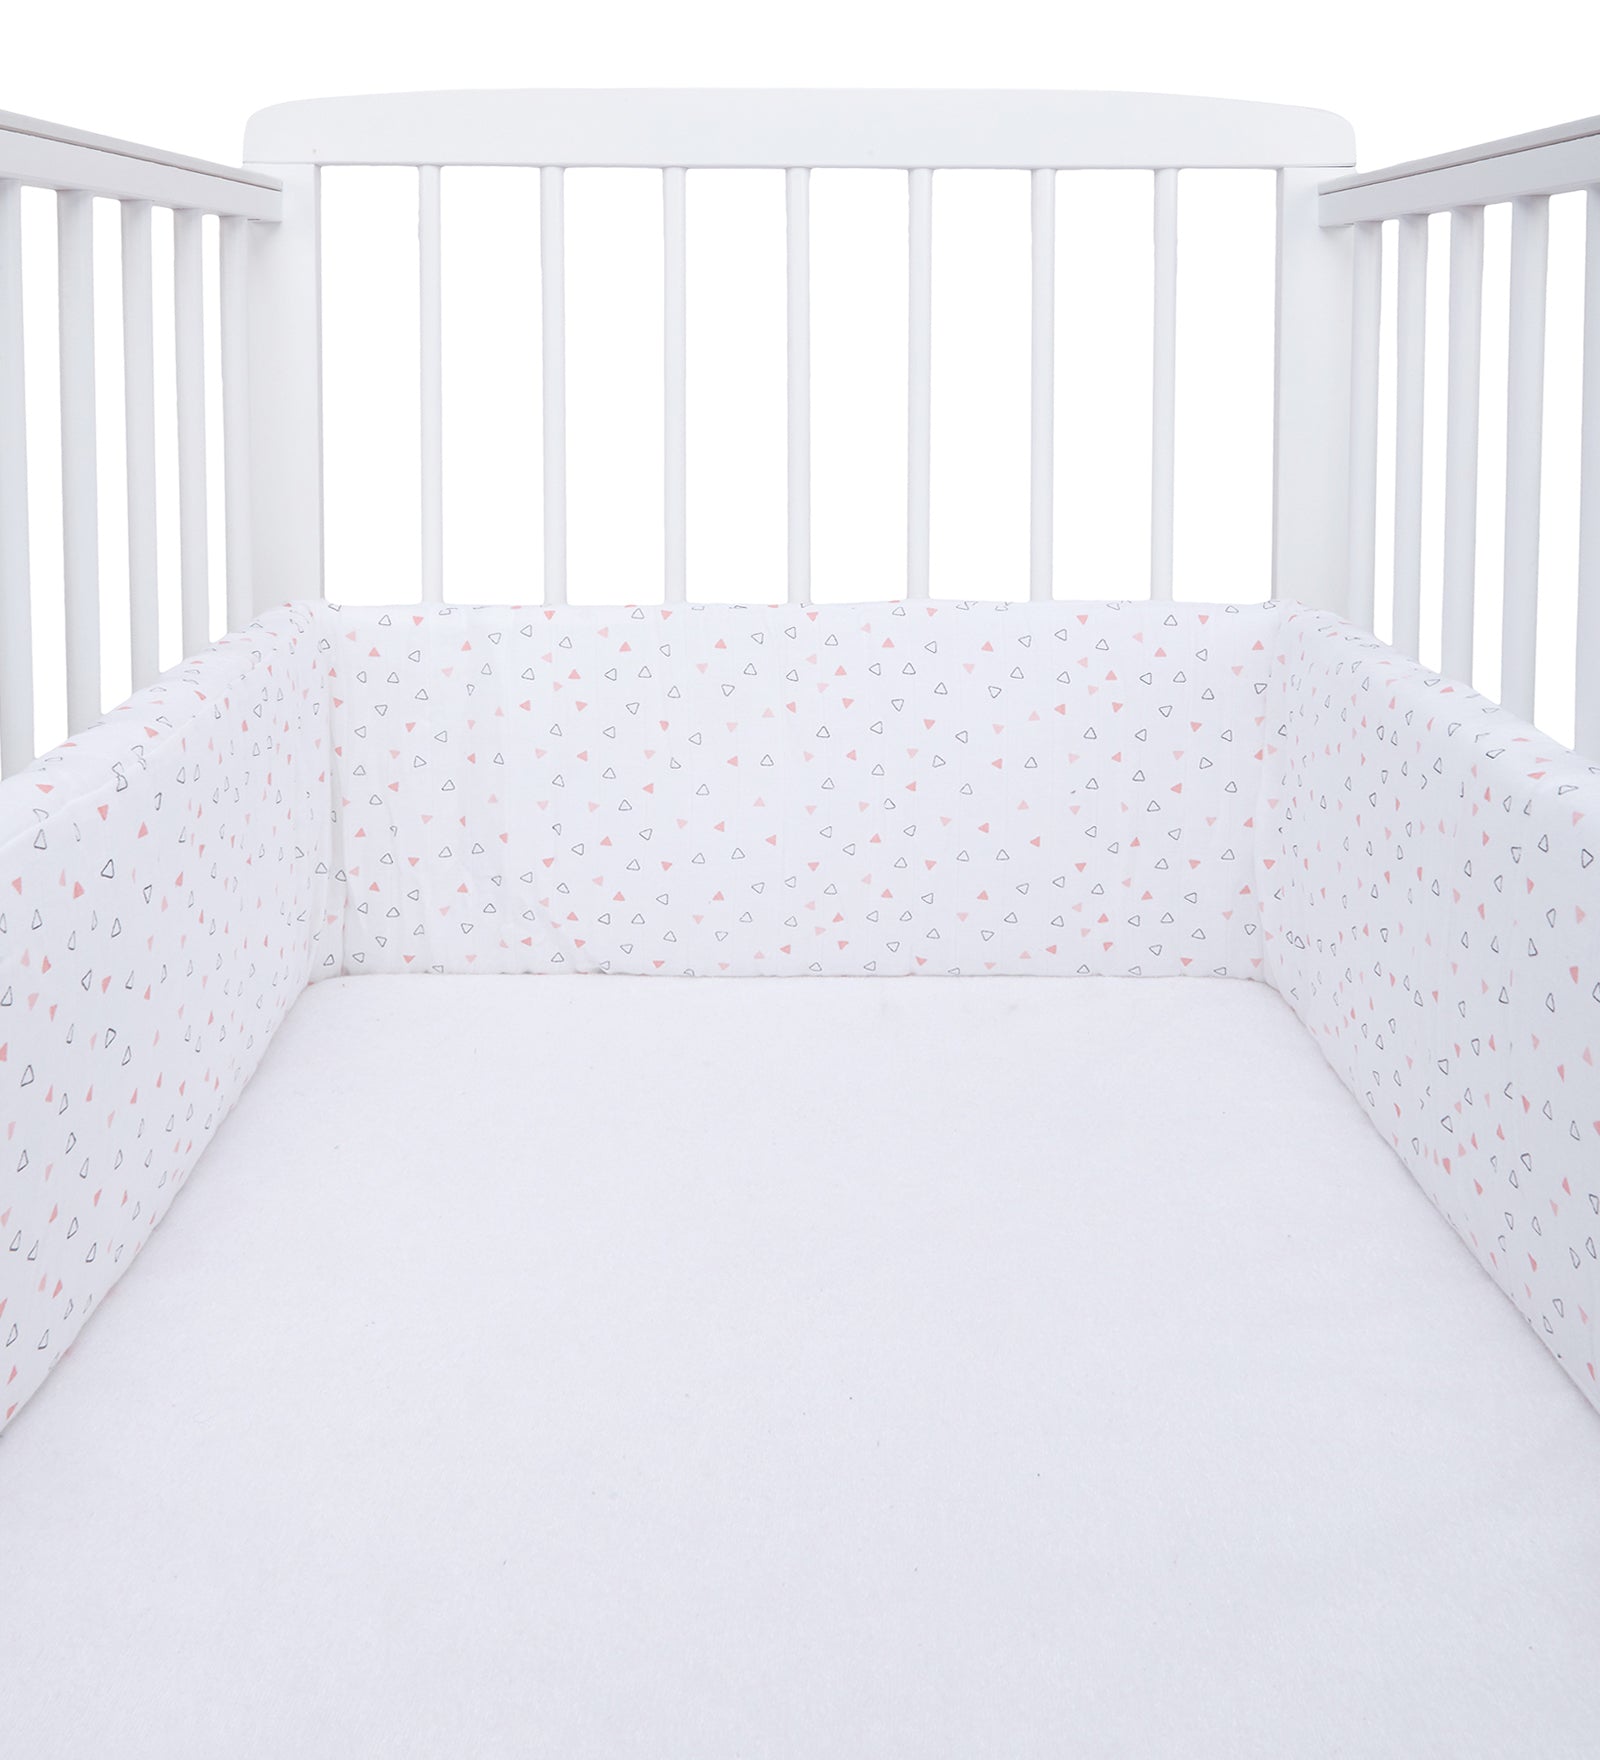 The White Cradle Baby Safe Cot Bumper Pad - Pink Triangles